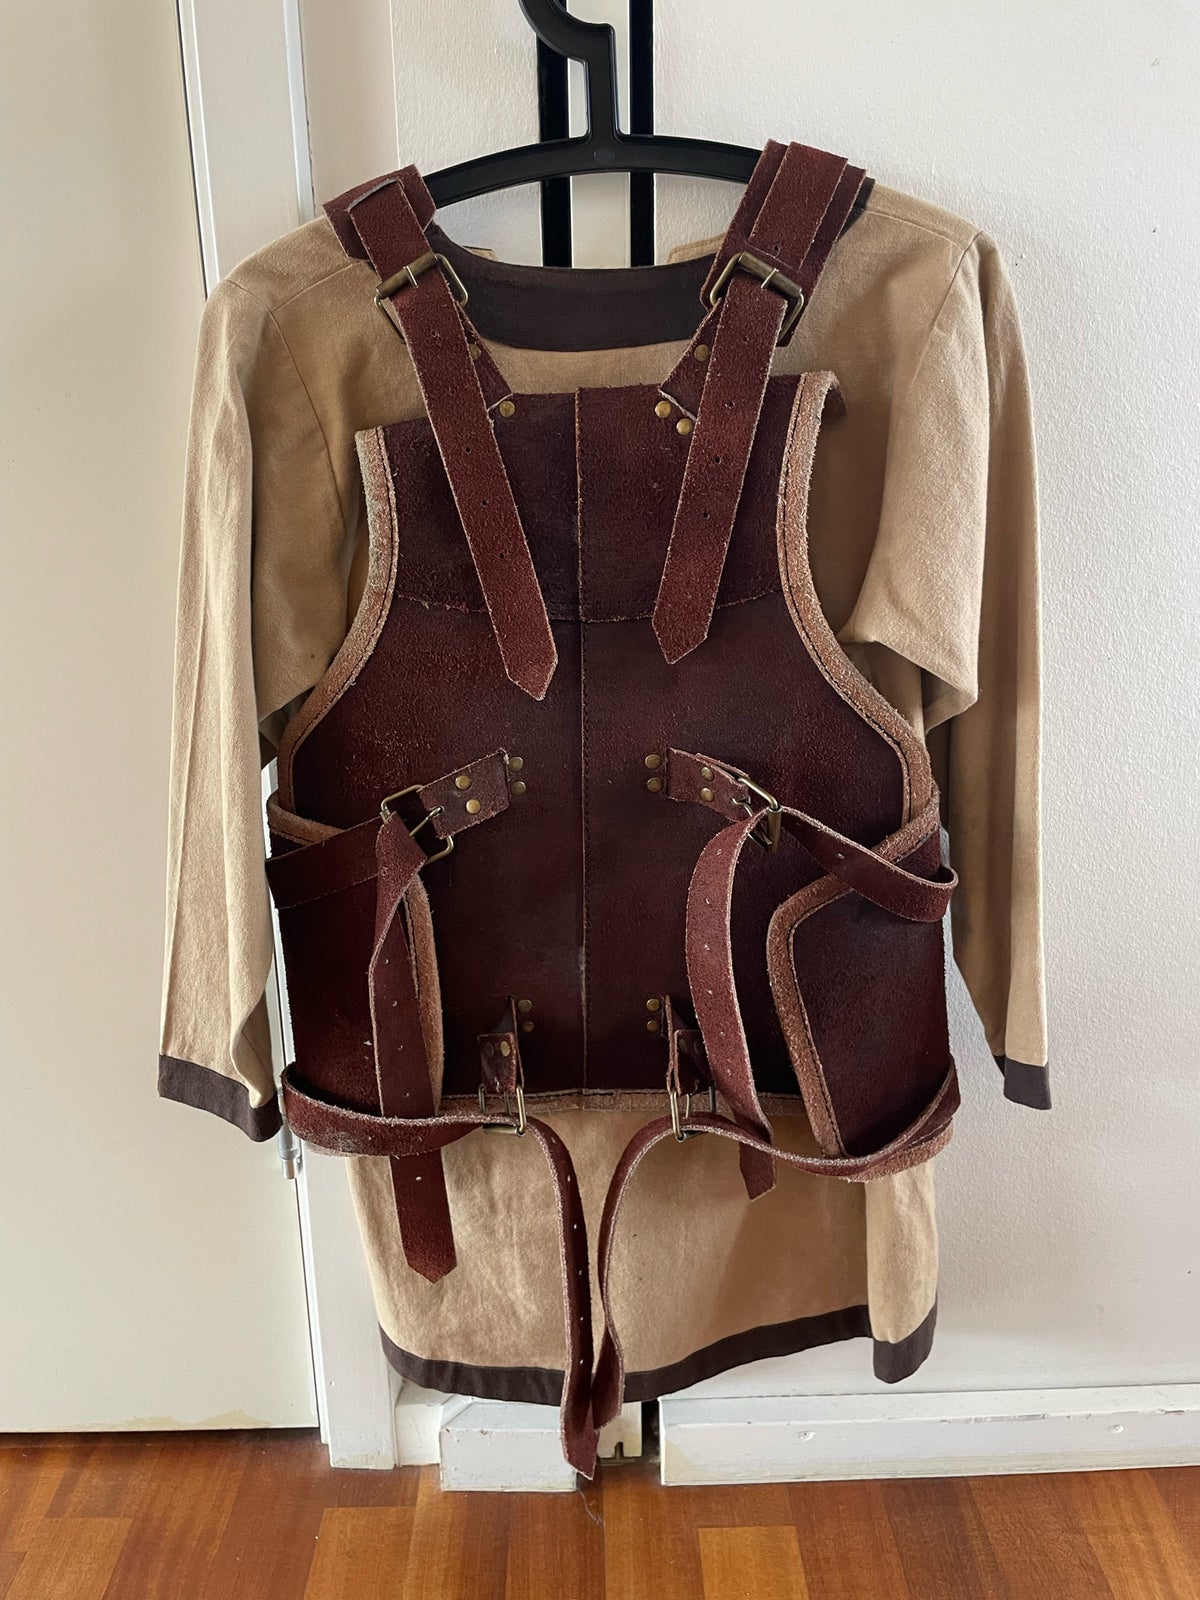 Rollespil, Ready for Battle Viking Armour, brun